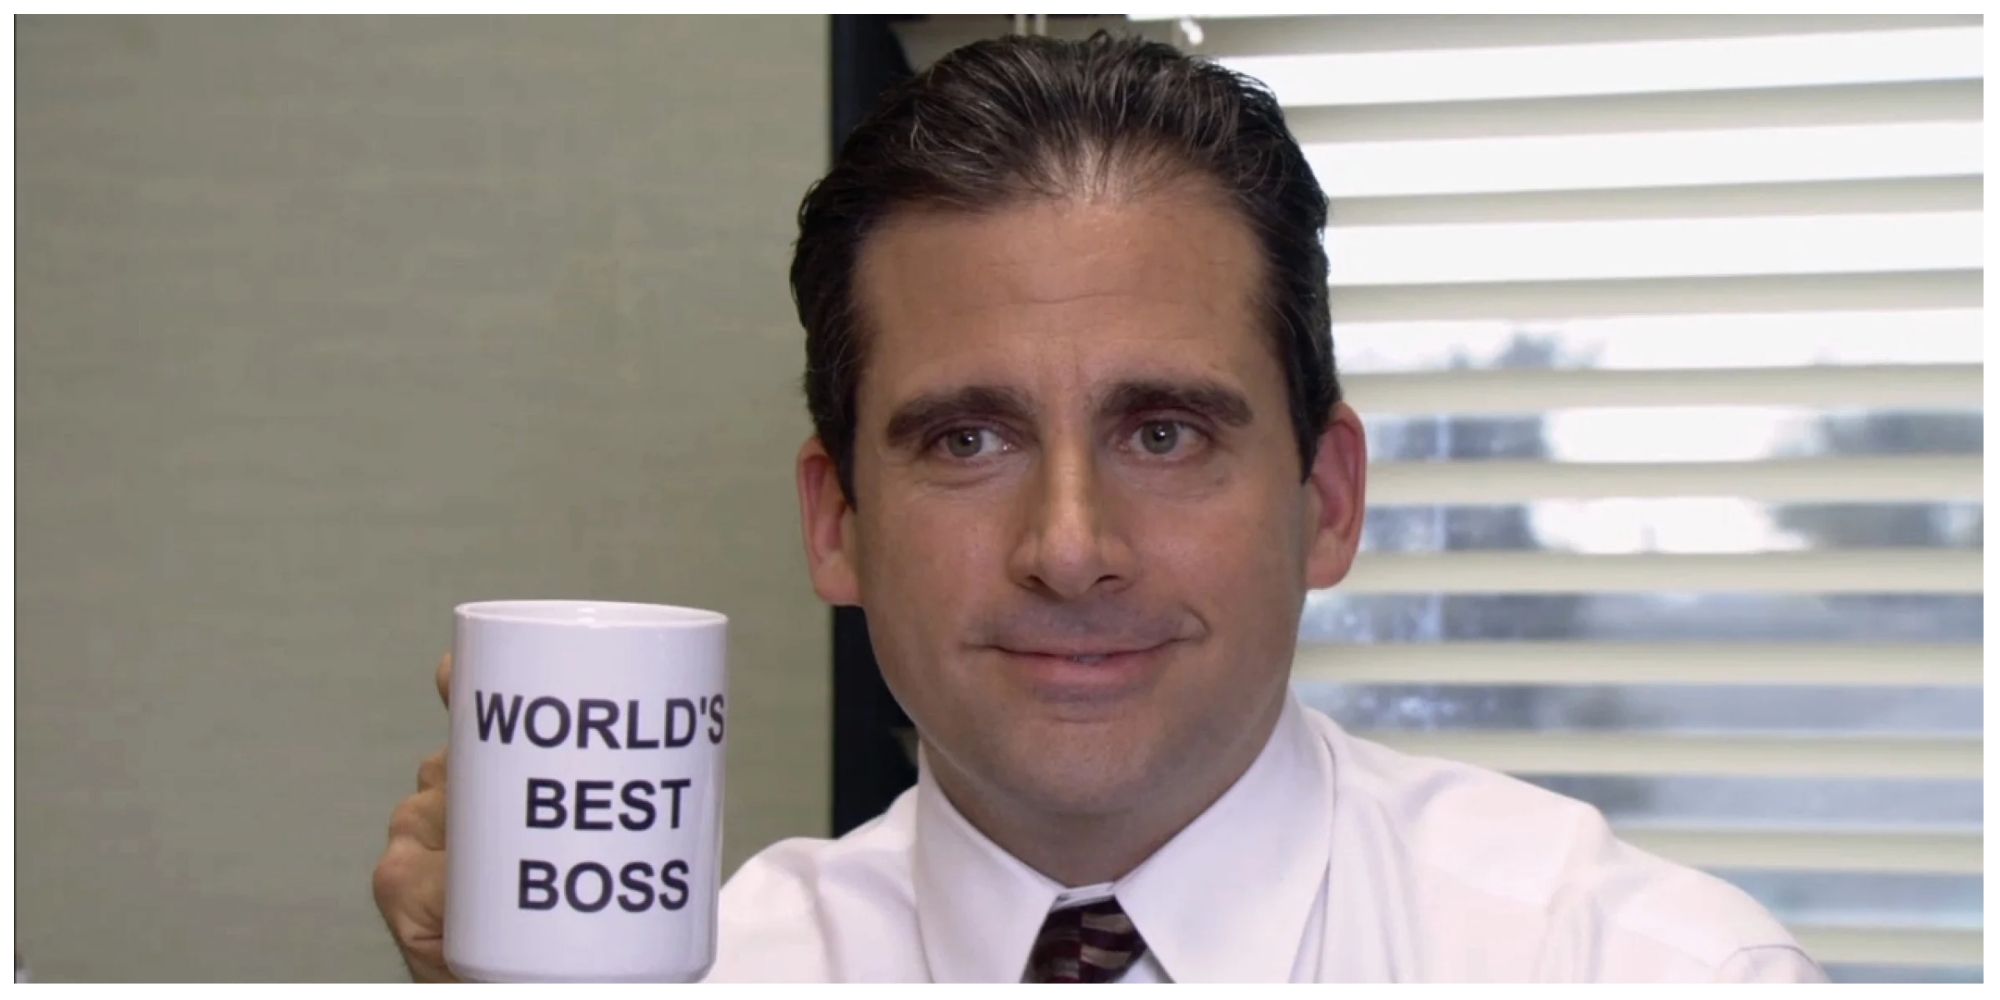 Michael Scott holding up his infamous 'World's Best Boss' mug with a smile